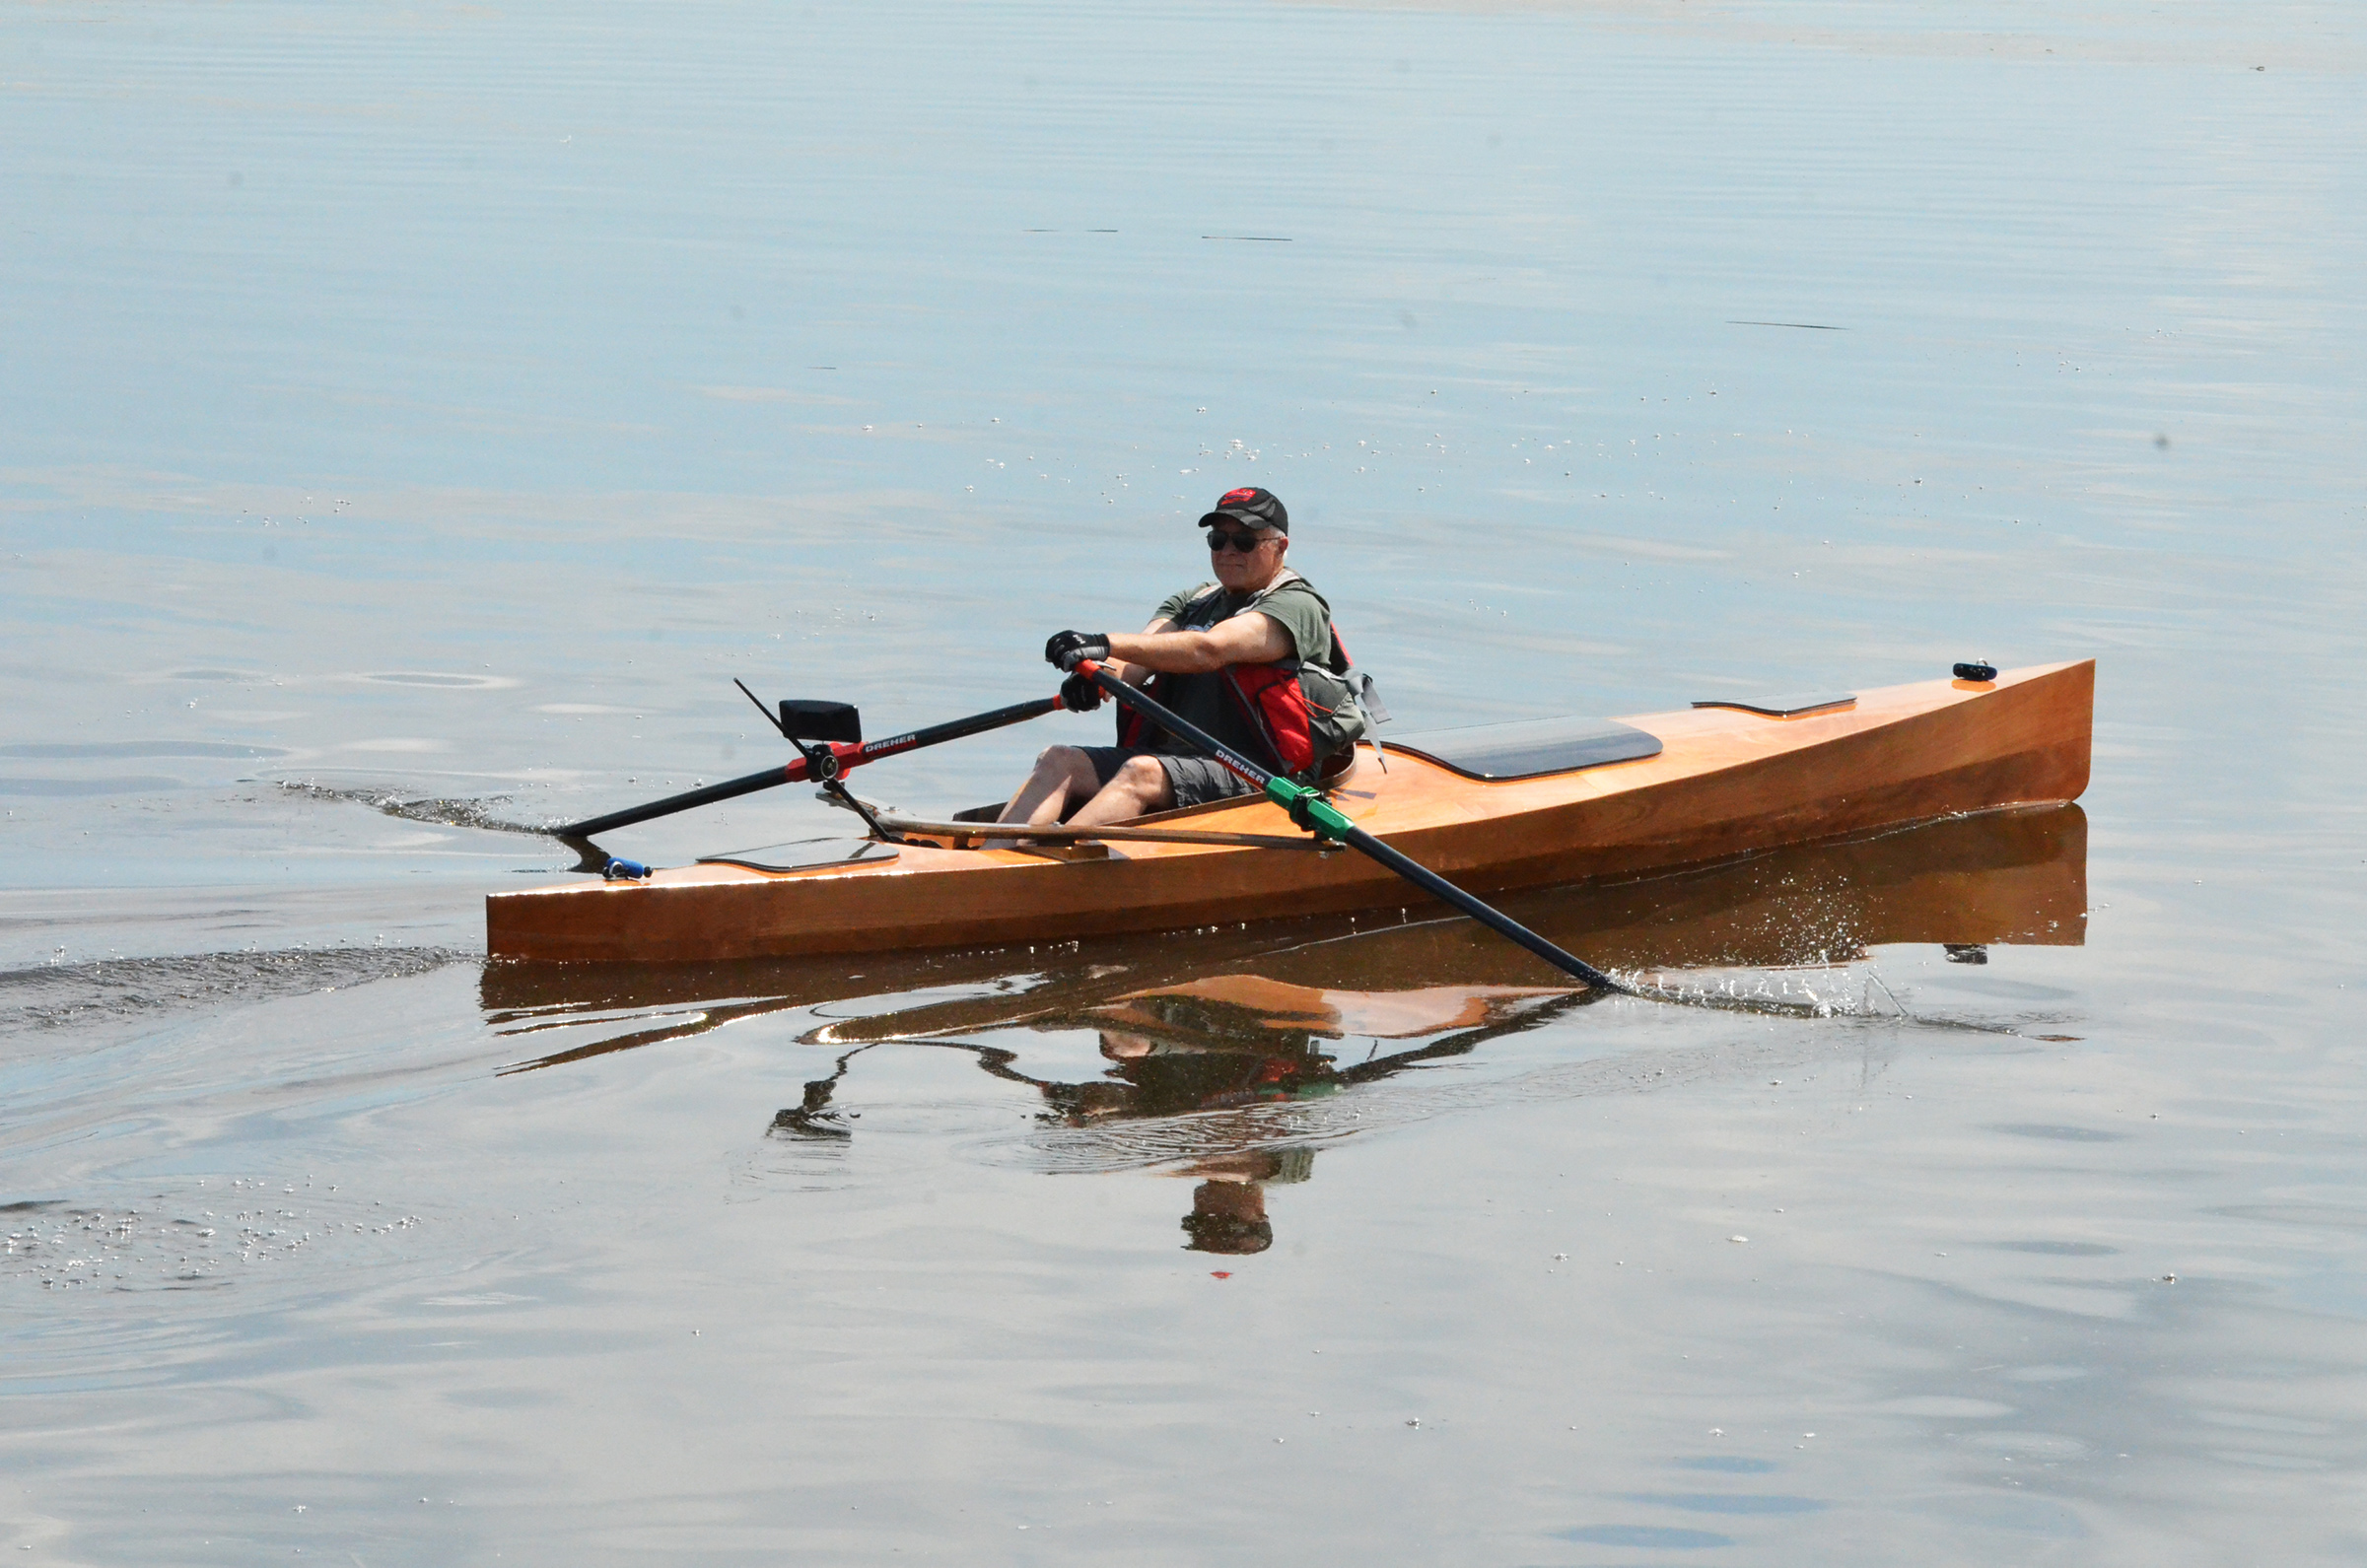 Jim Duff rows past the camera in an Expedition rowboat from Angus